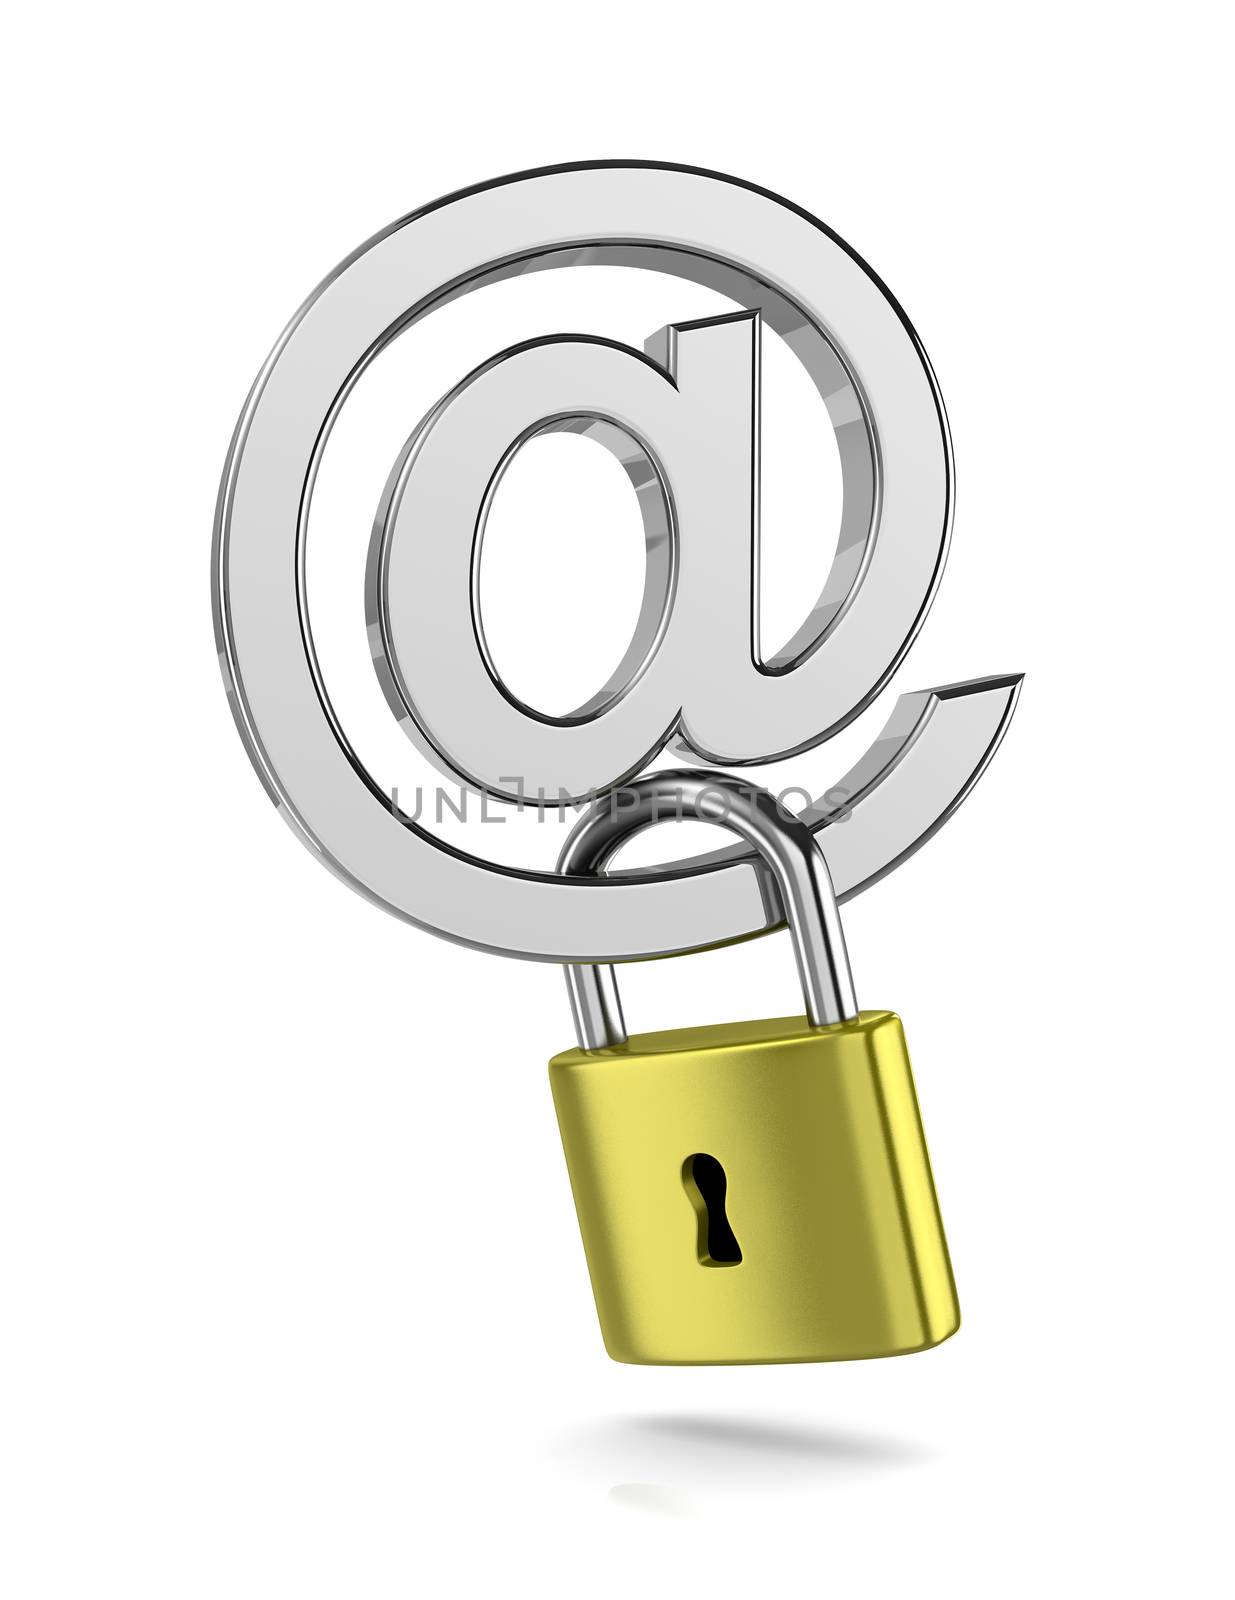 Email Chrome Sign with a Closed Padlock Isolated on White Background 3D Illustration